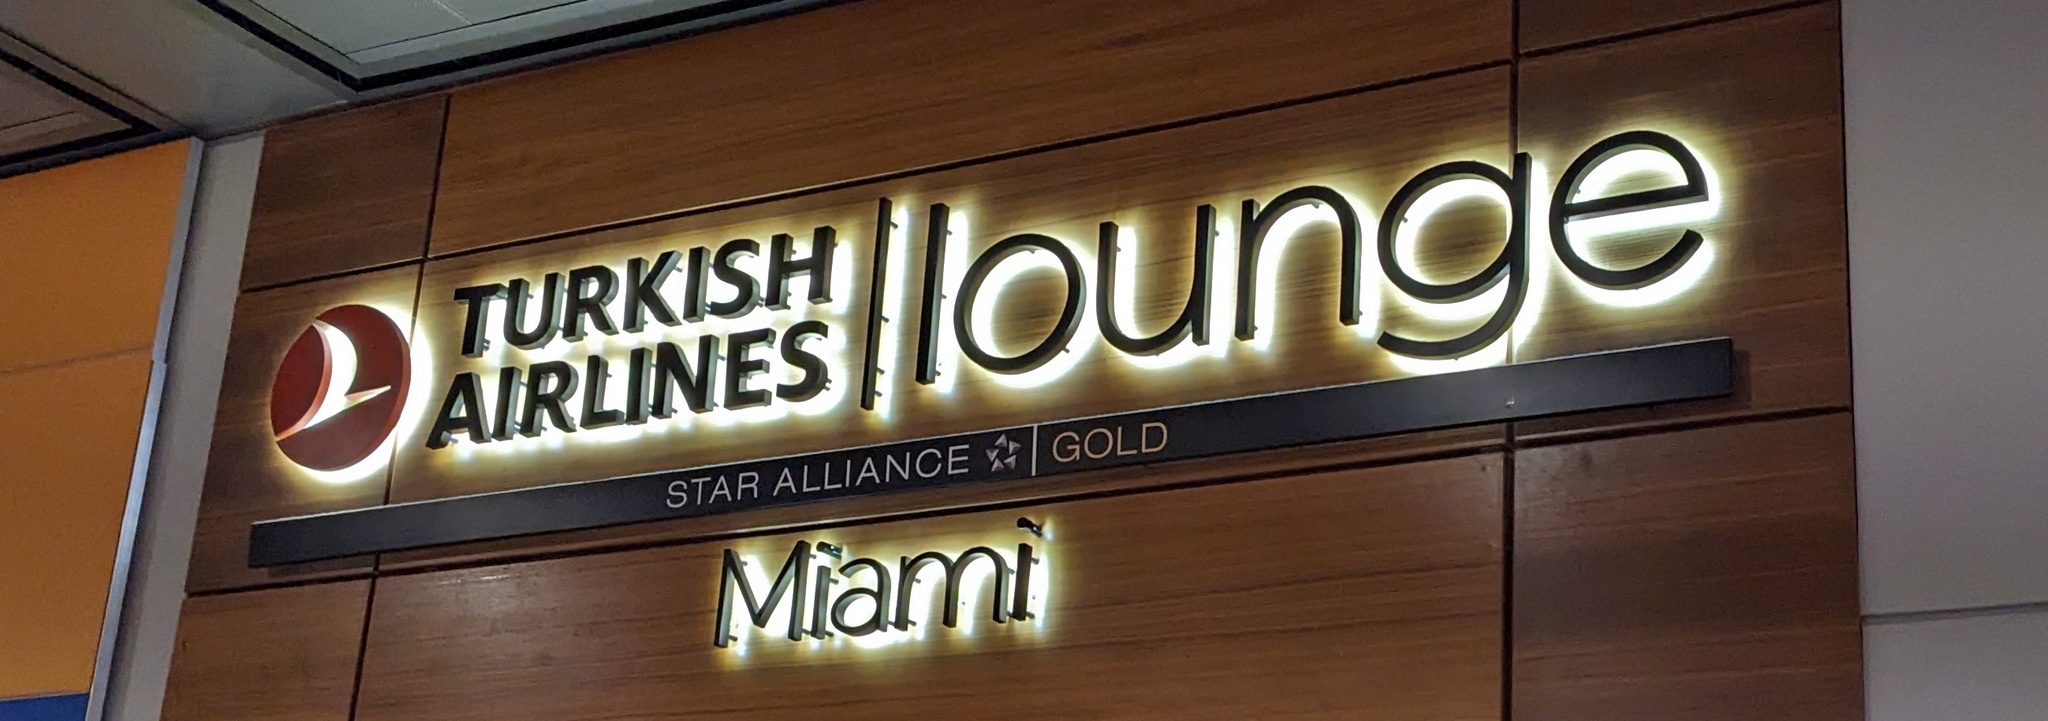 entrance sign for Turkish Airlines lounge in Miami